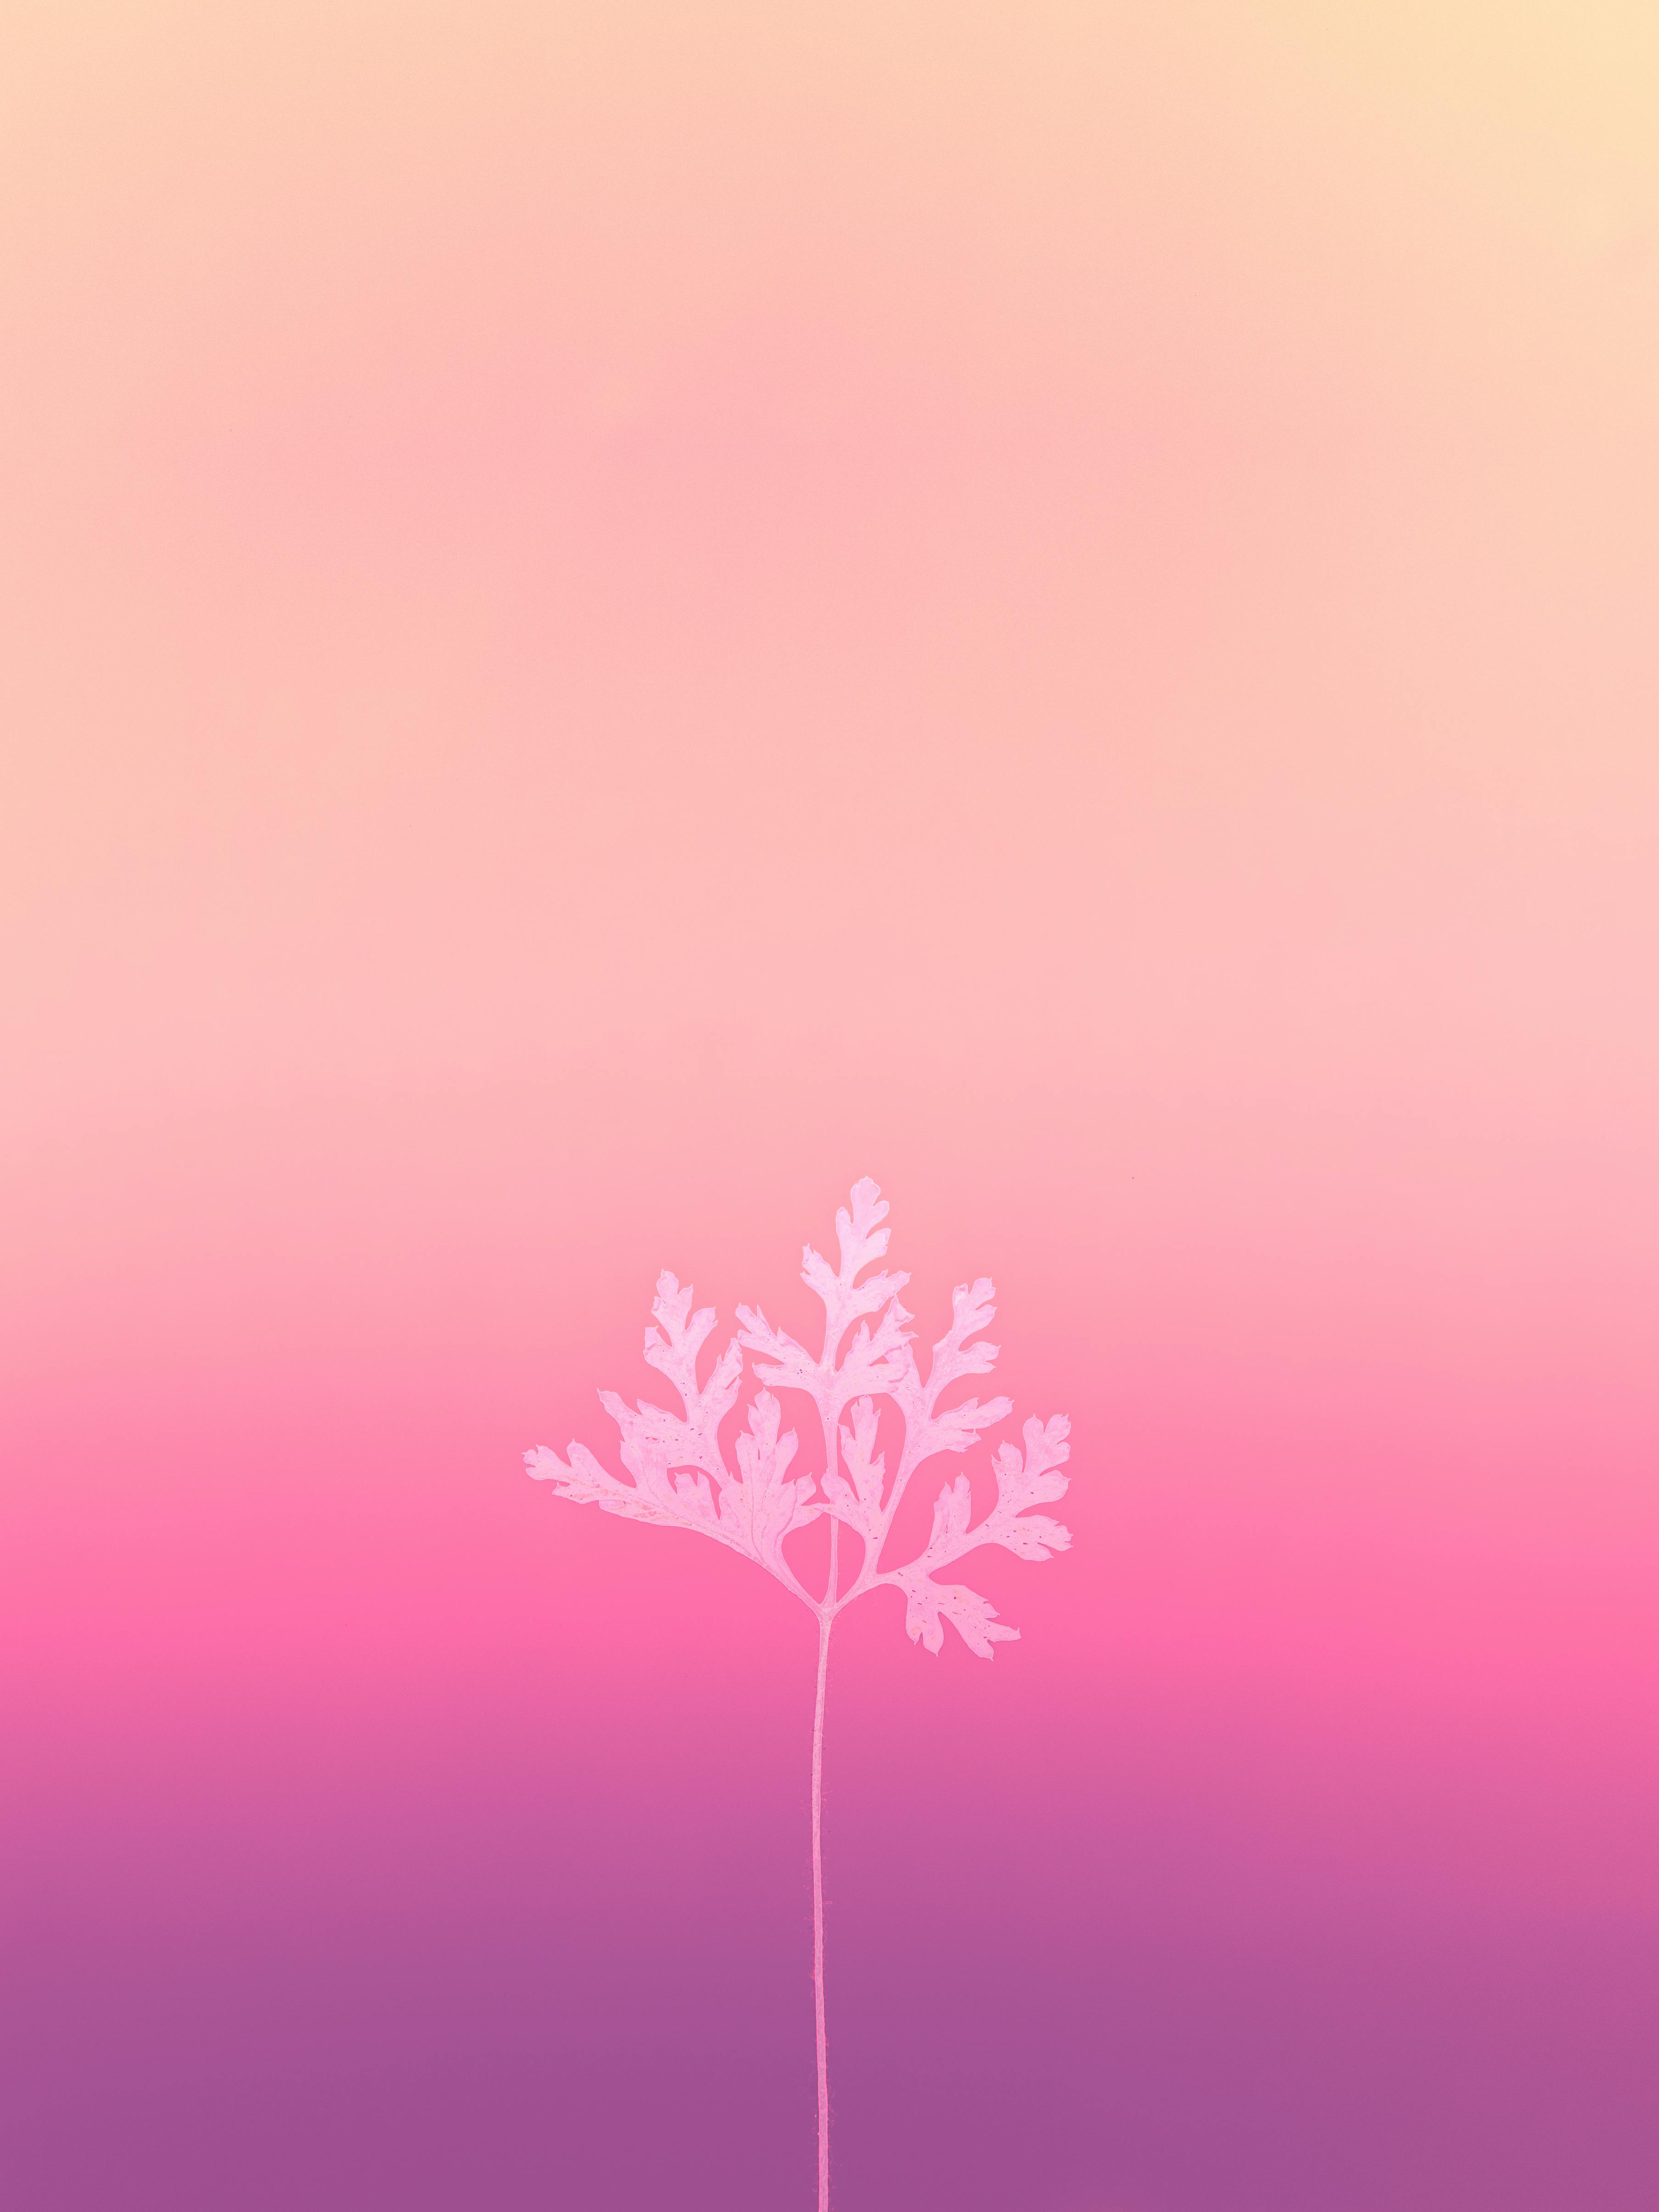 HD wallpaper i like iphone6 and ipad air 3 blur backgrounds pink  color  Wallpaper Flare